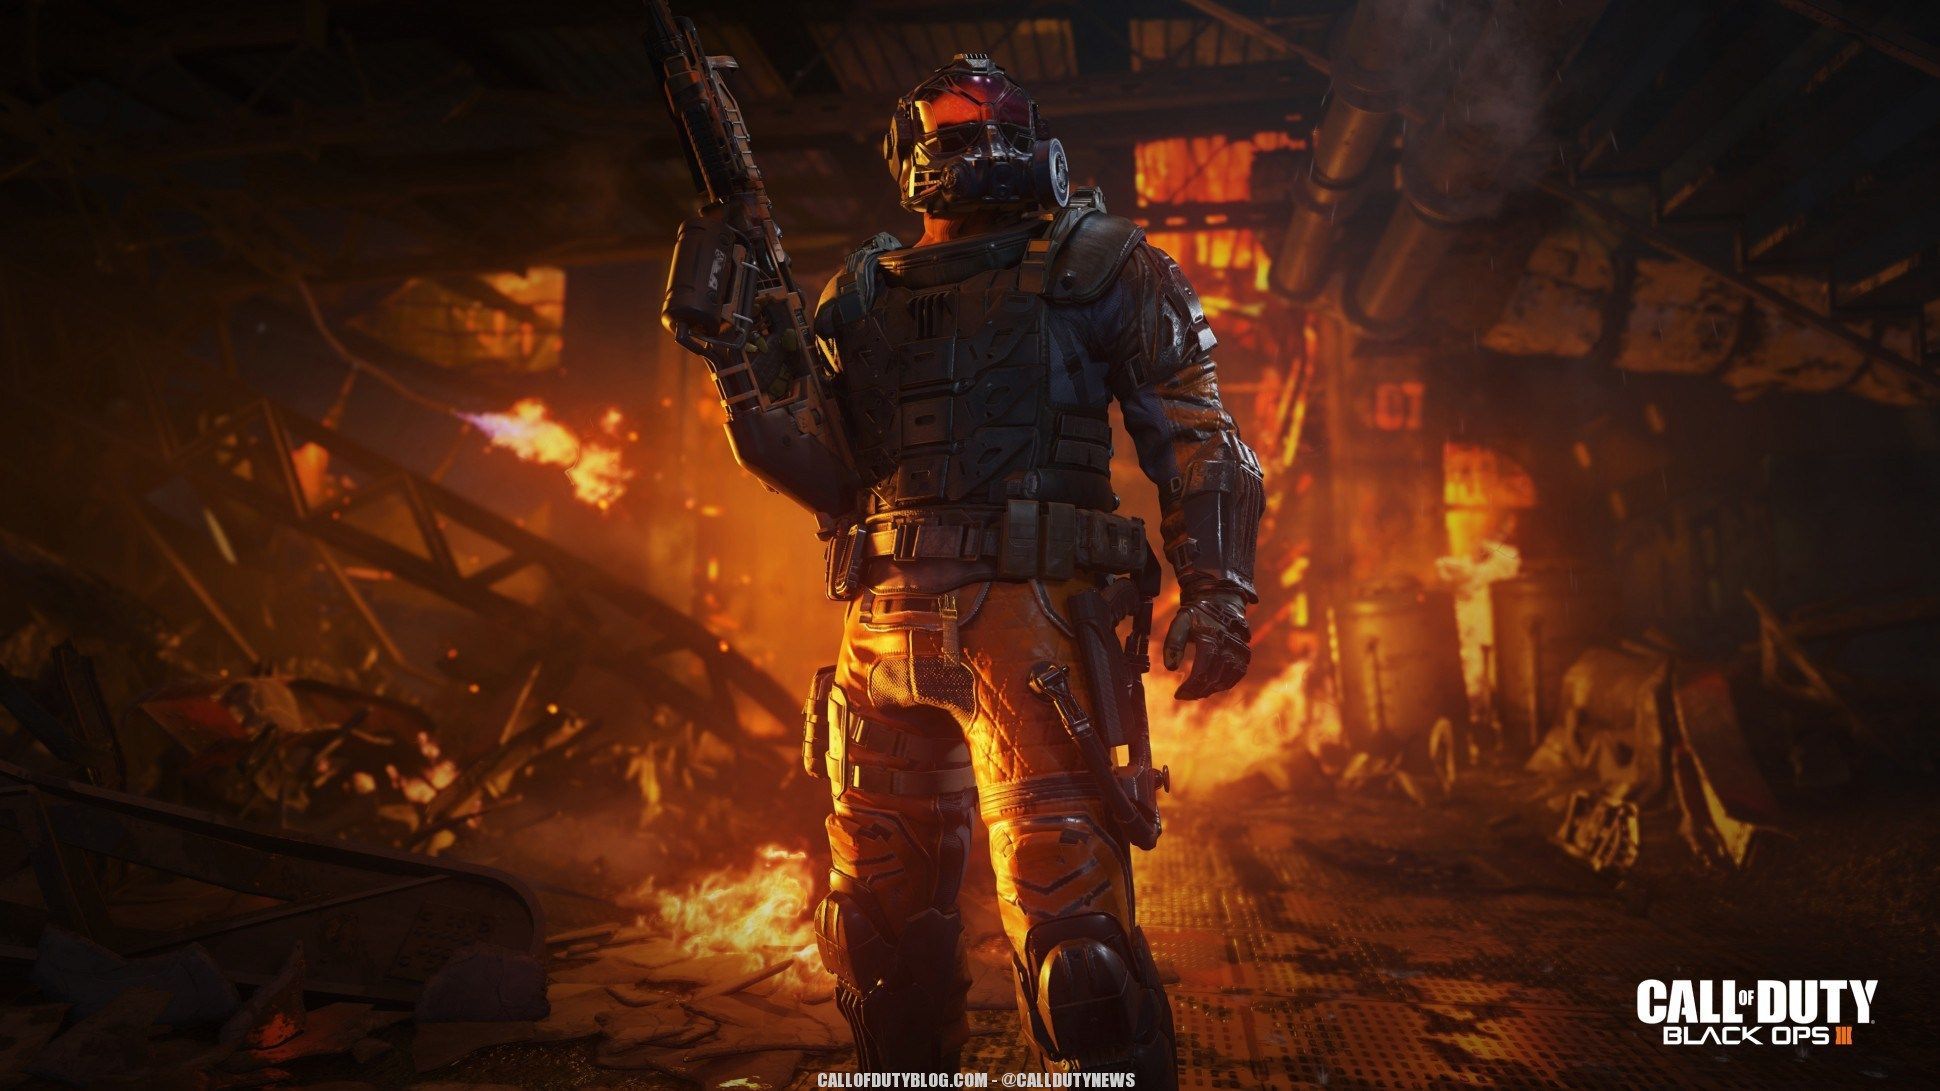 All 'Firebreak' Specialist Voice Lines as of the Black Ops 3 Beta [LEAK]. Call of duty black ops Call of duty black, Black ops iii